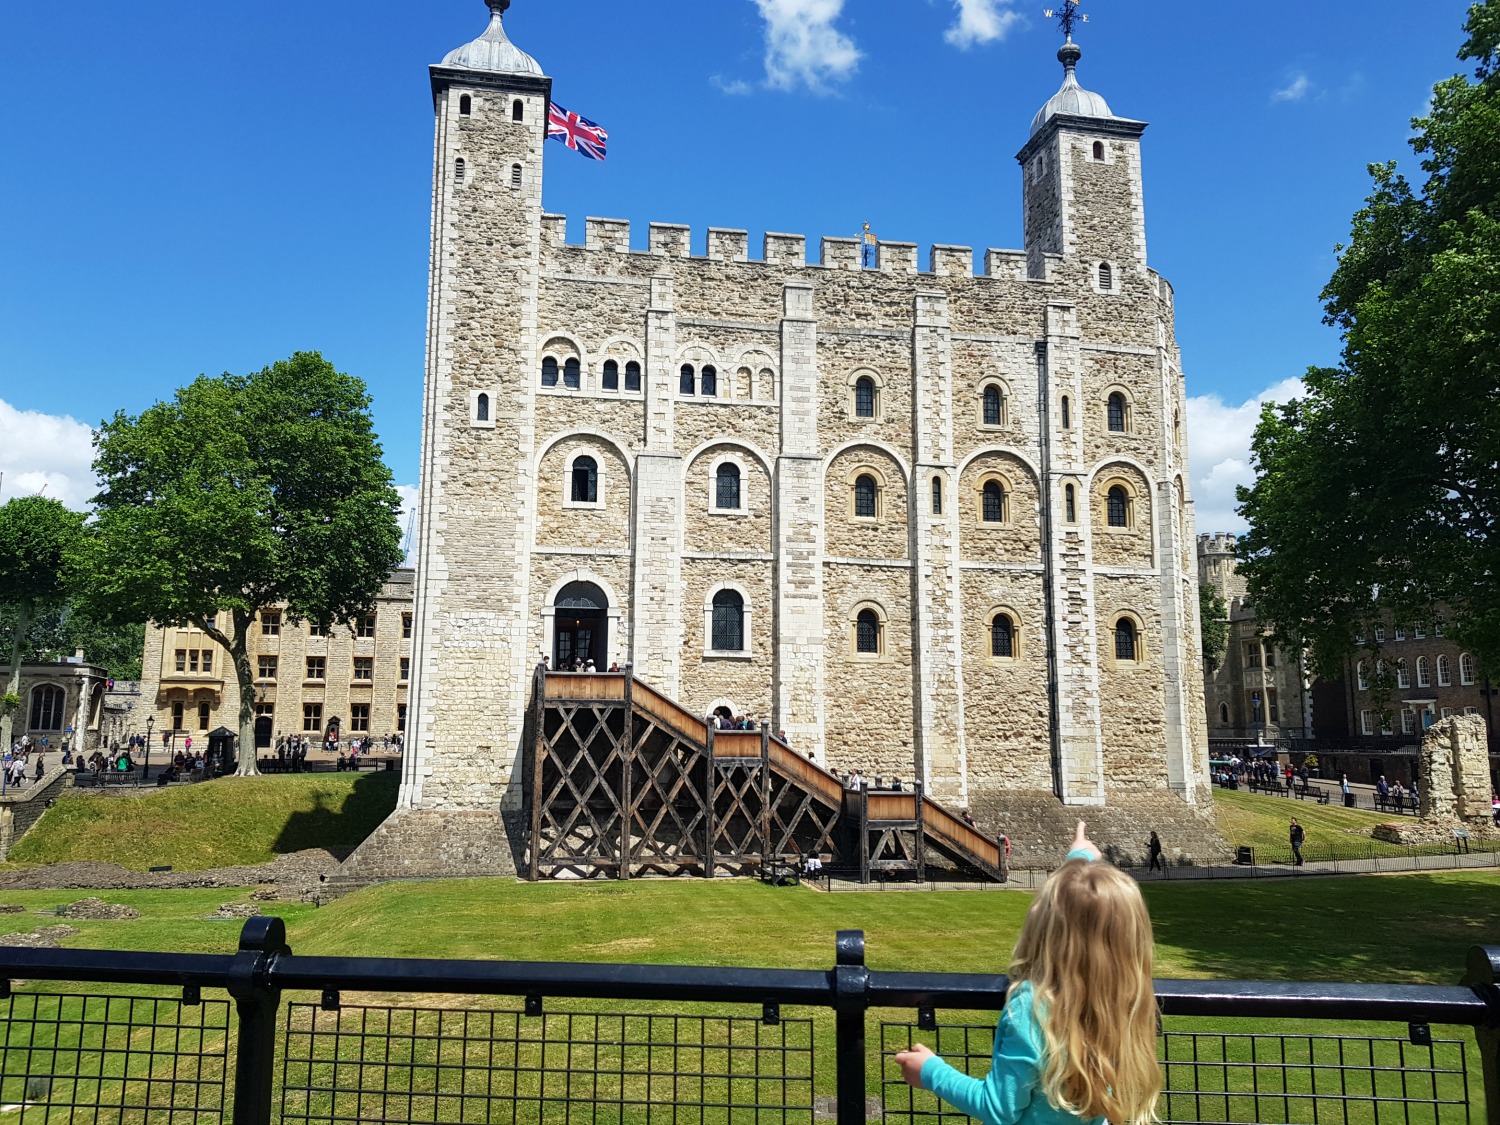 My daughter points up at the White Tower in the Tower of London with blue skies in the background